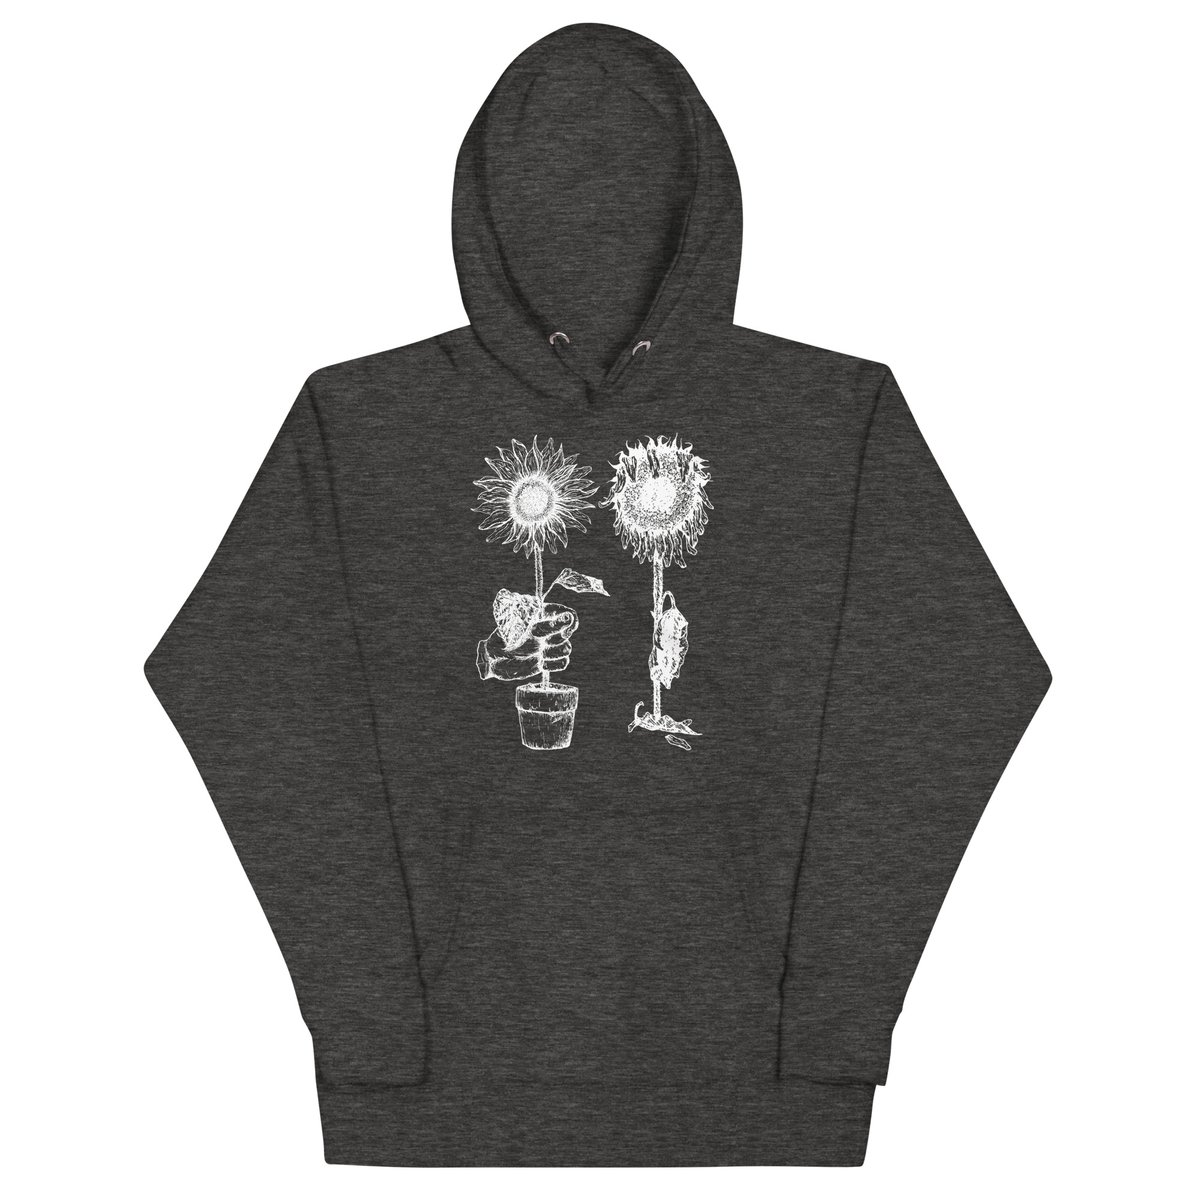 Image of All's Well / Ends Well Hooded Sweatshirt (5 Colors)